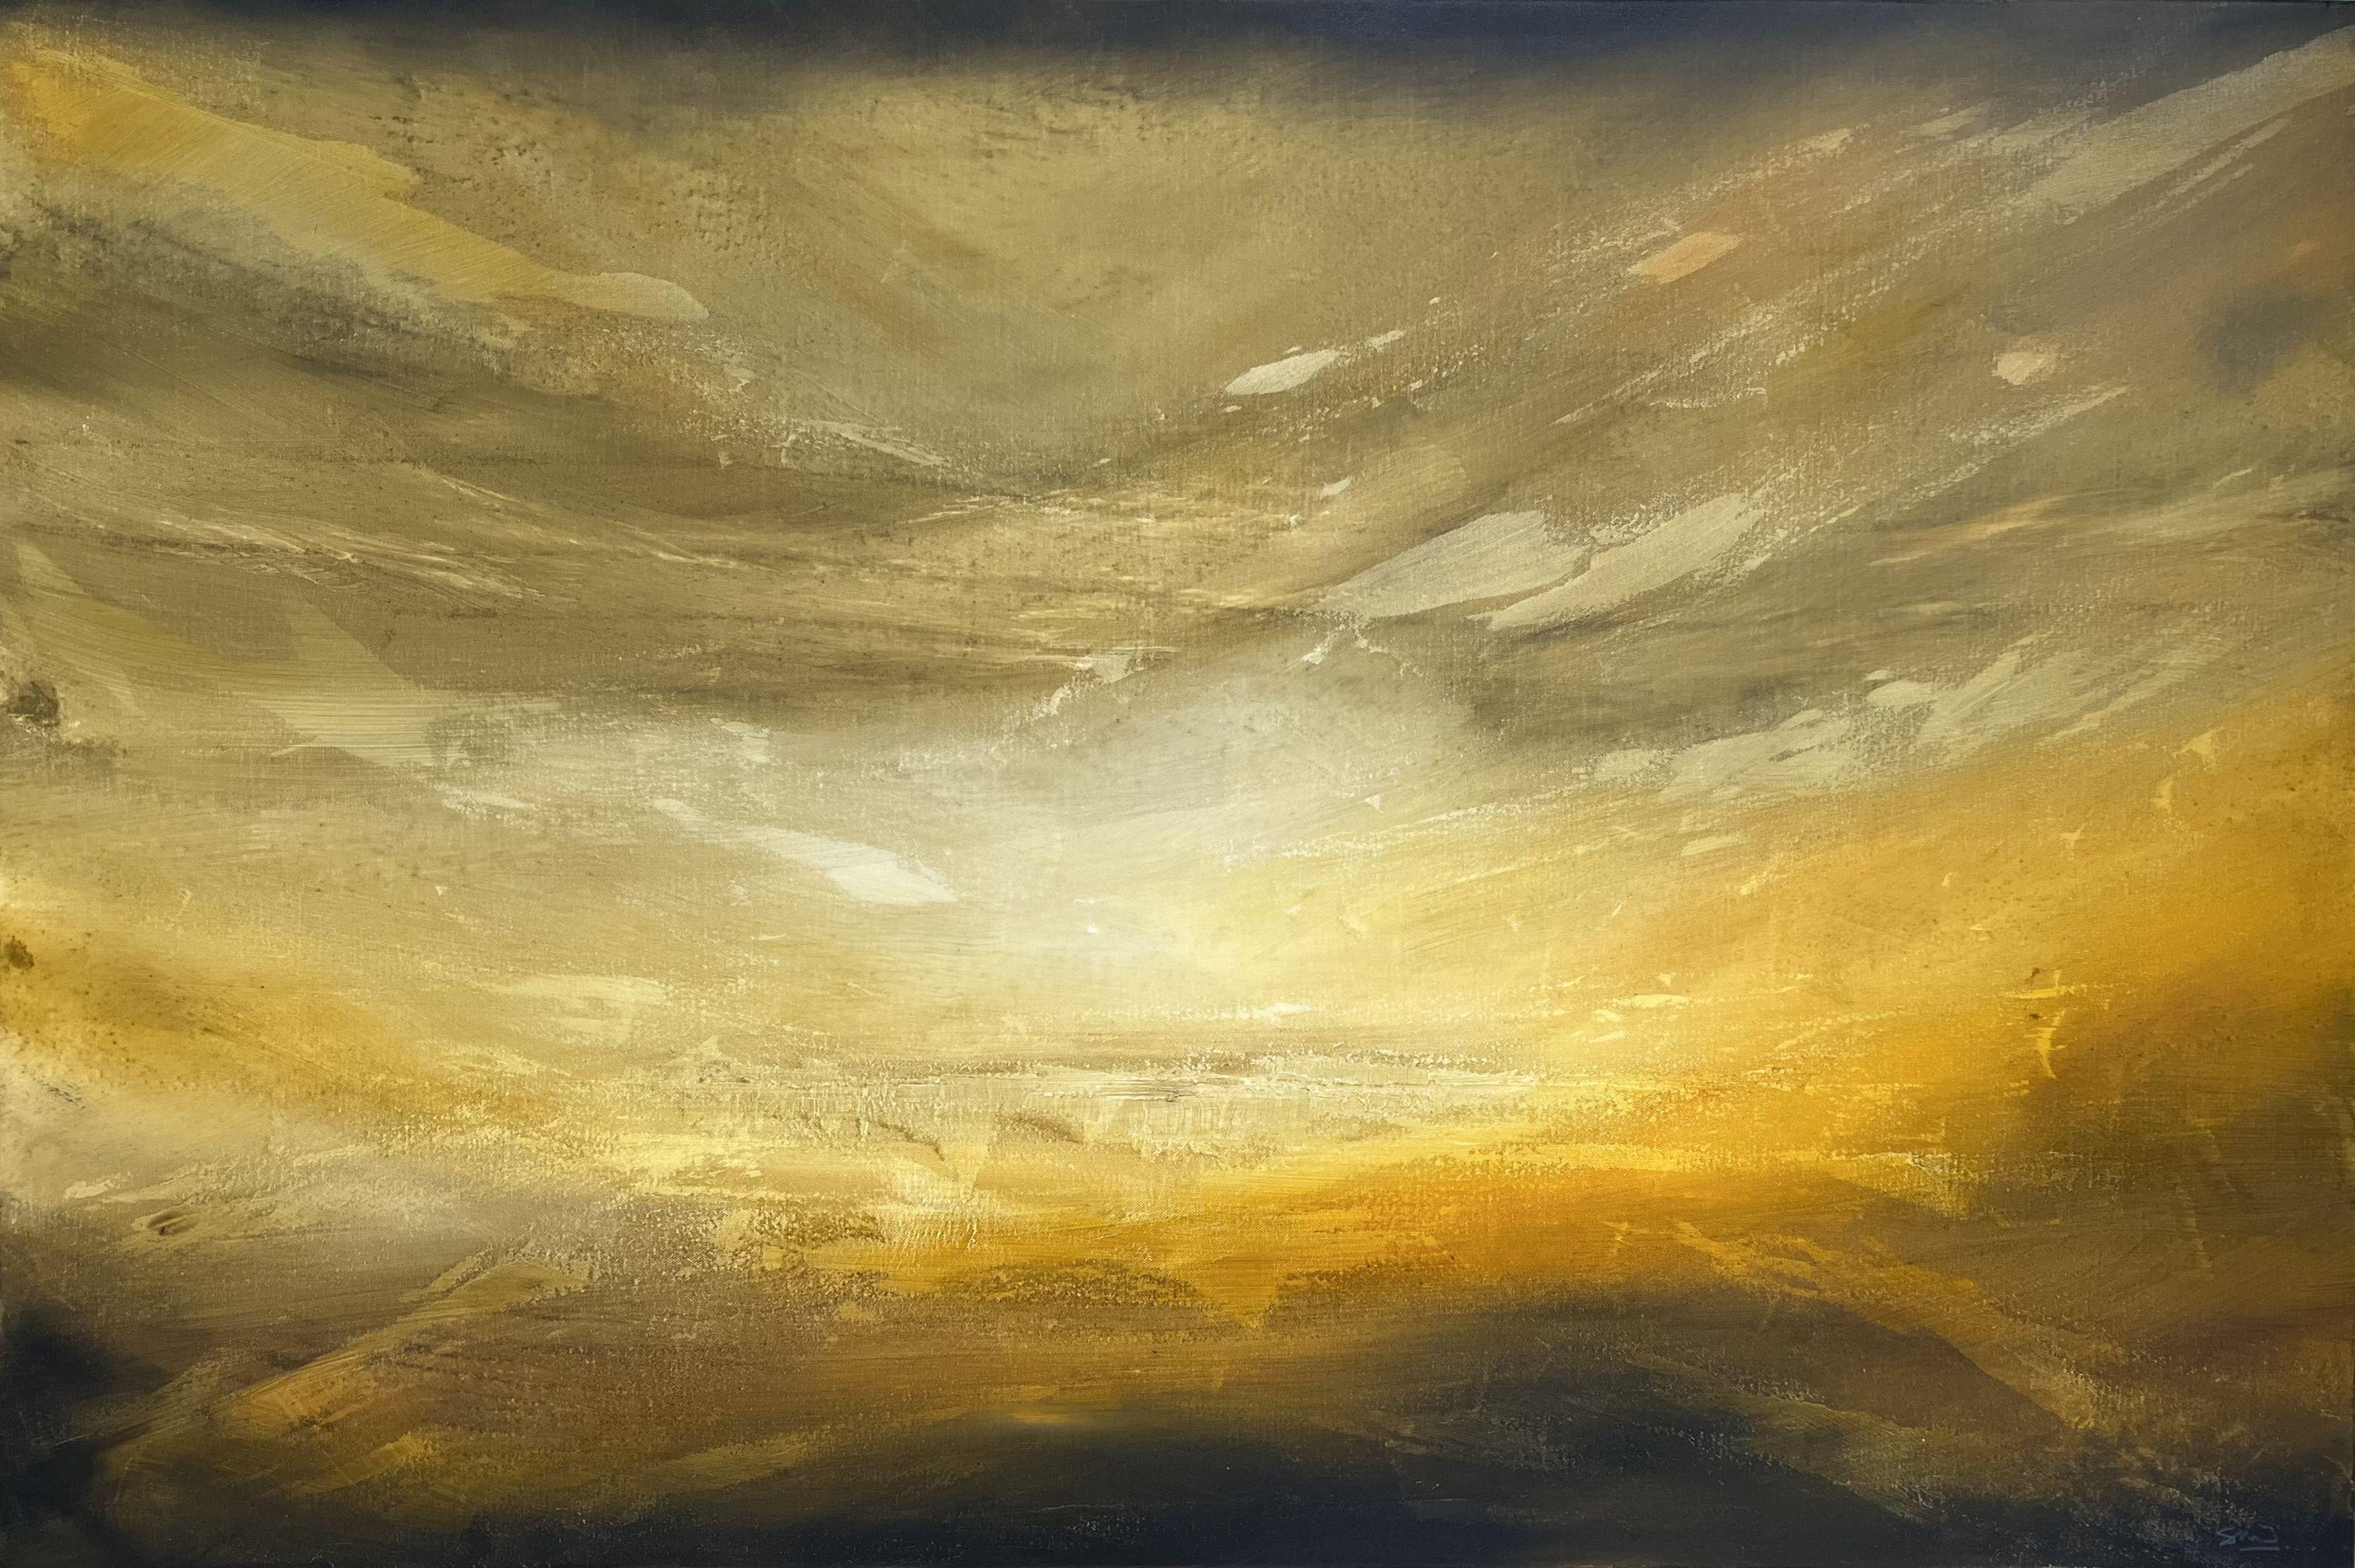 In this piece, I aimed to capture the warm ochre hues of a late summer sunset. The deep colour of the autumn sky, against the sable tones of the waters beneath, is a striking palette.  The subtle texture adds depth and makes the colours and contours